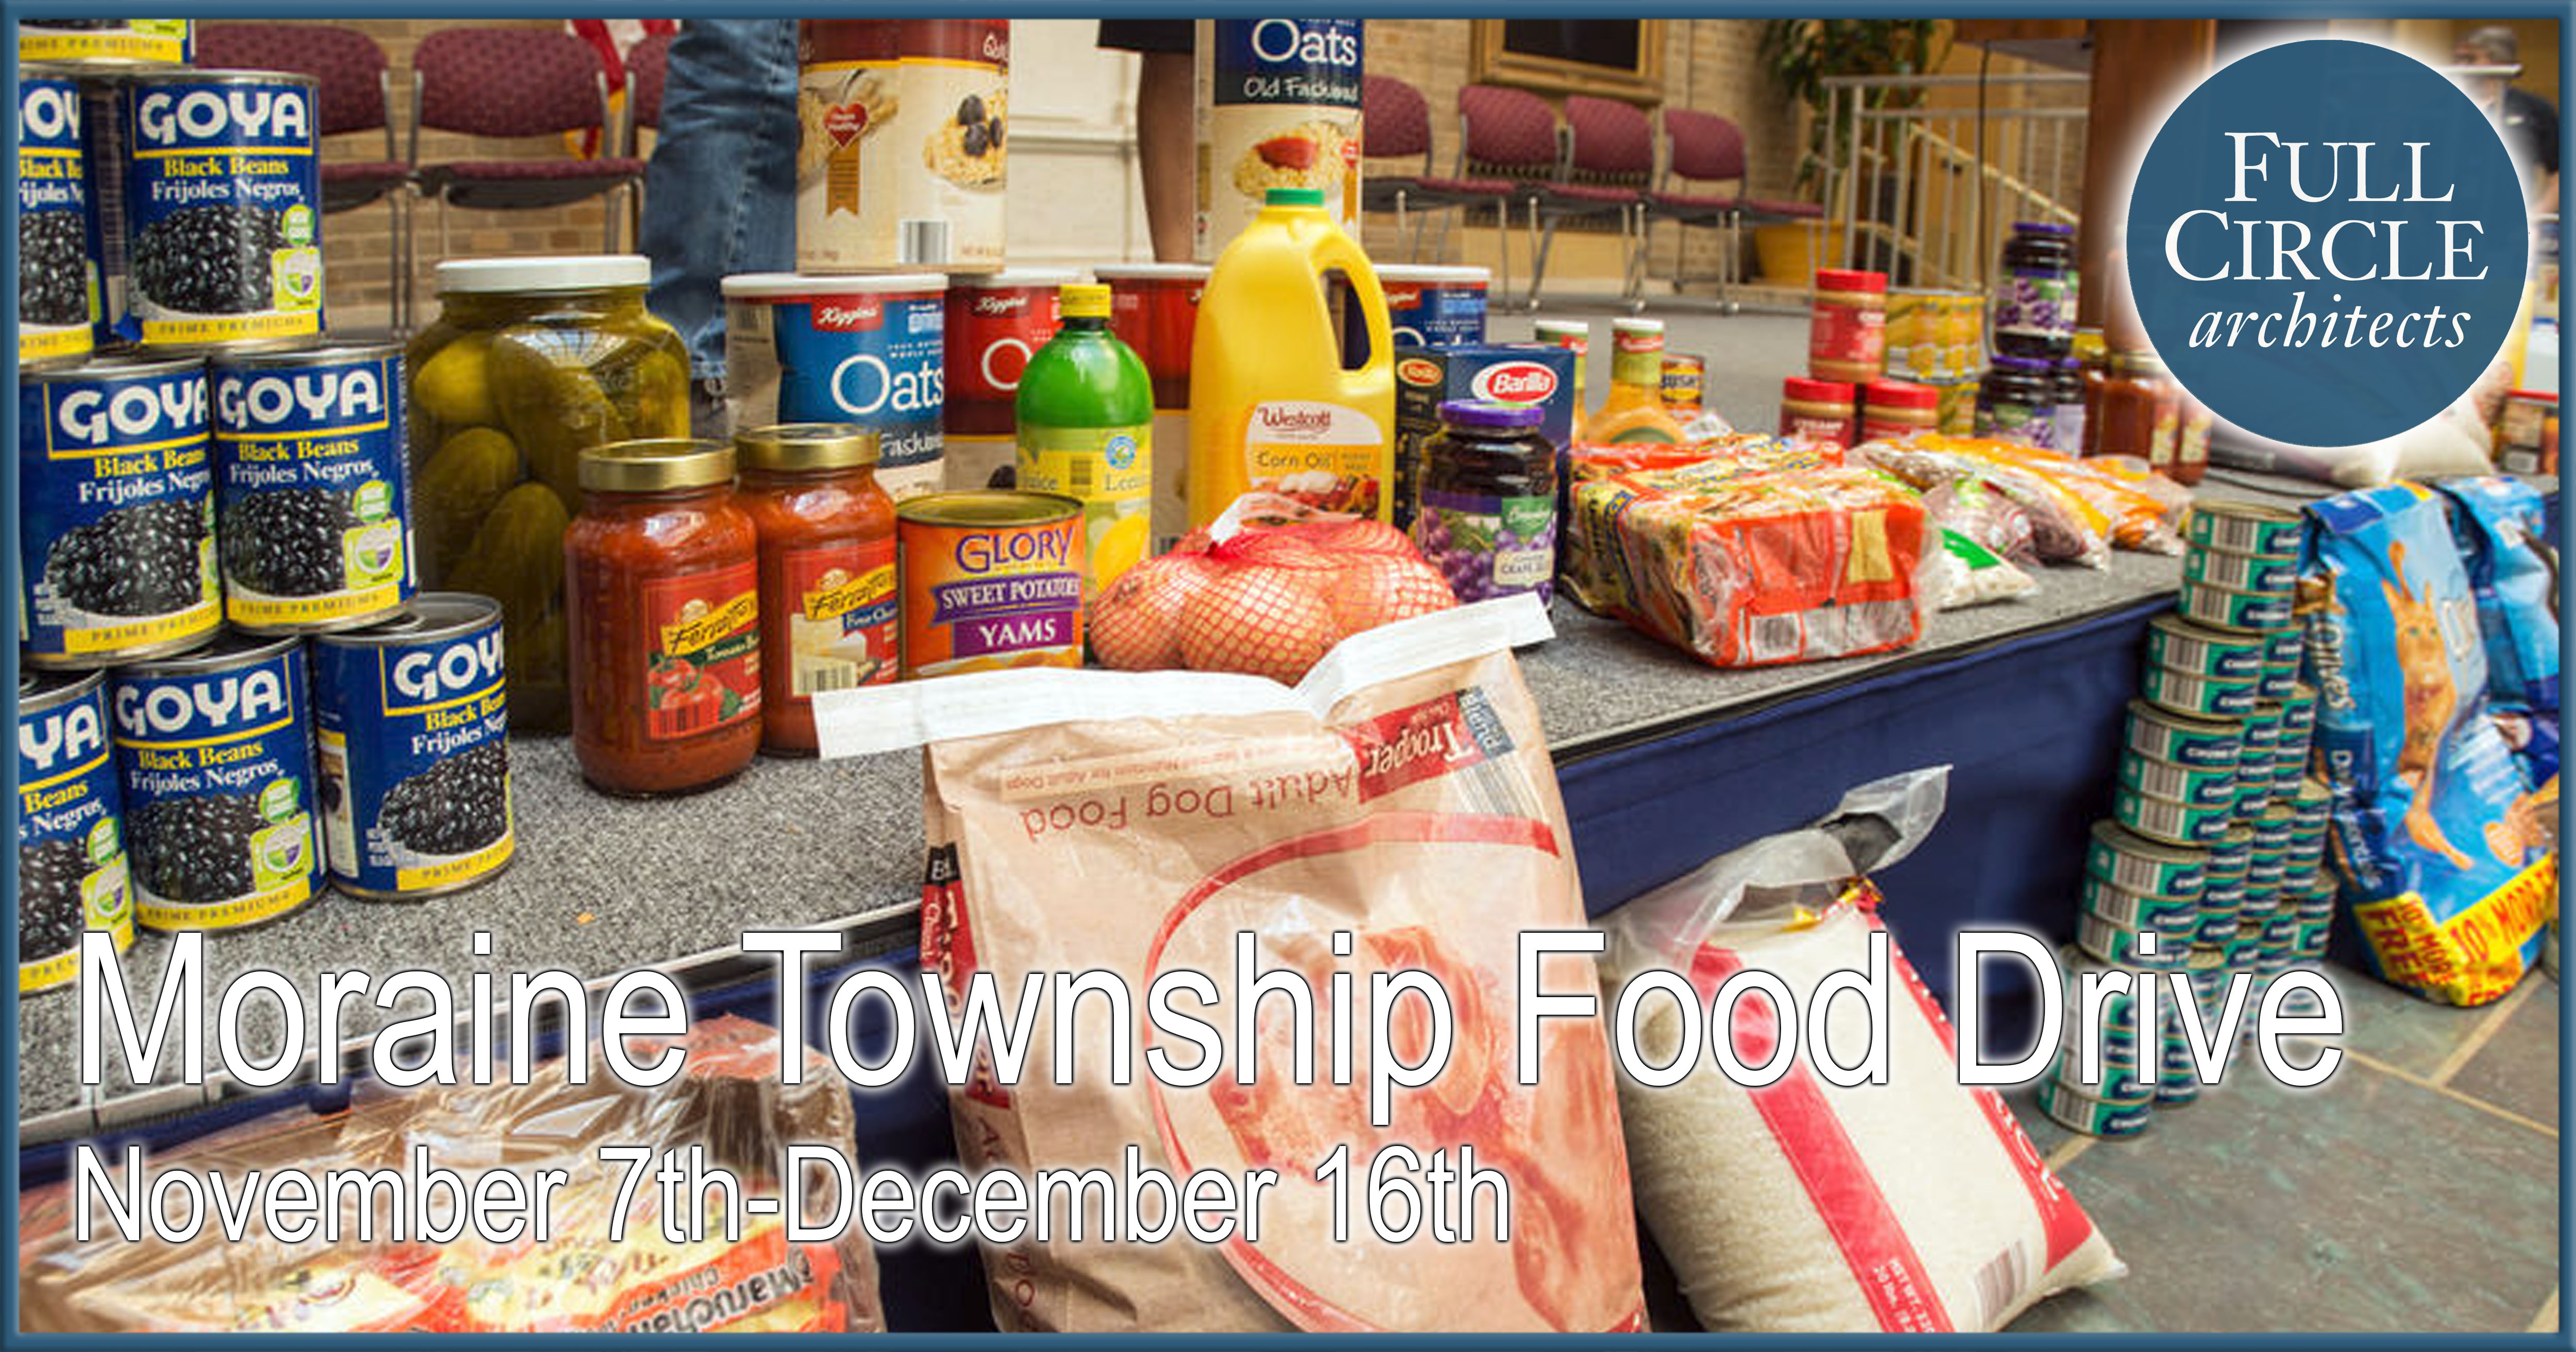 Ravinia District’s Holiday Food Drive | Full Circle Architects